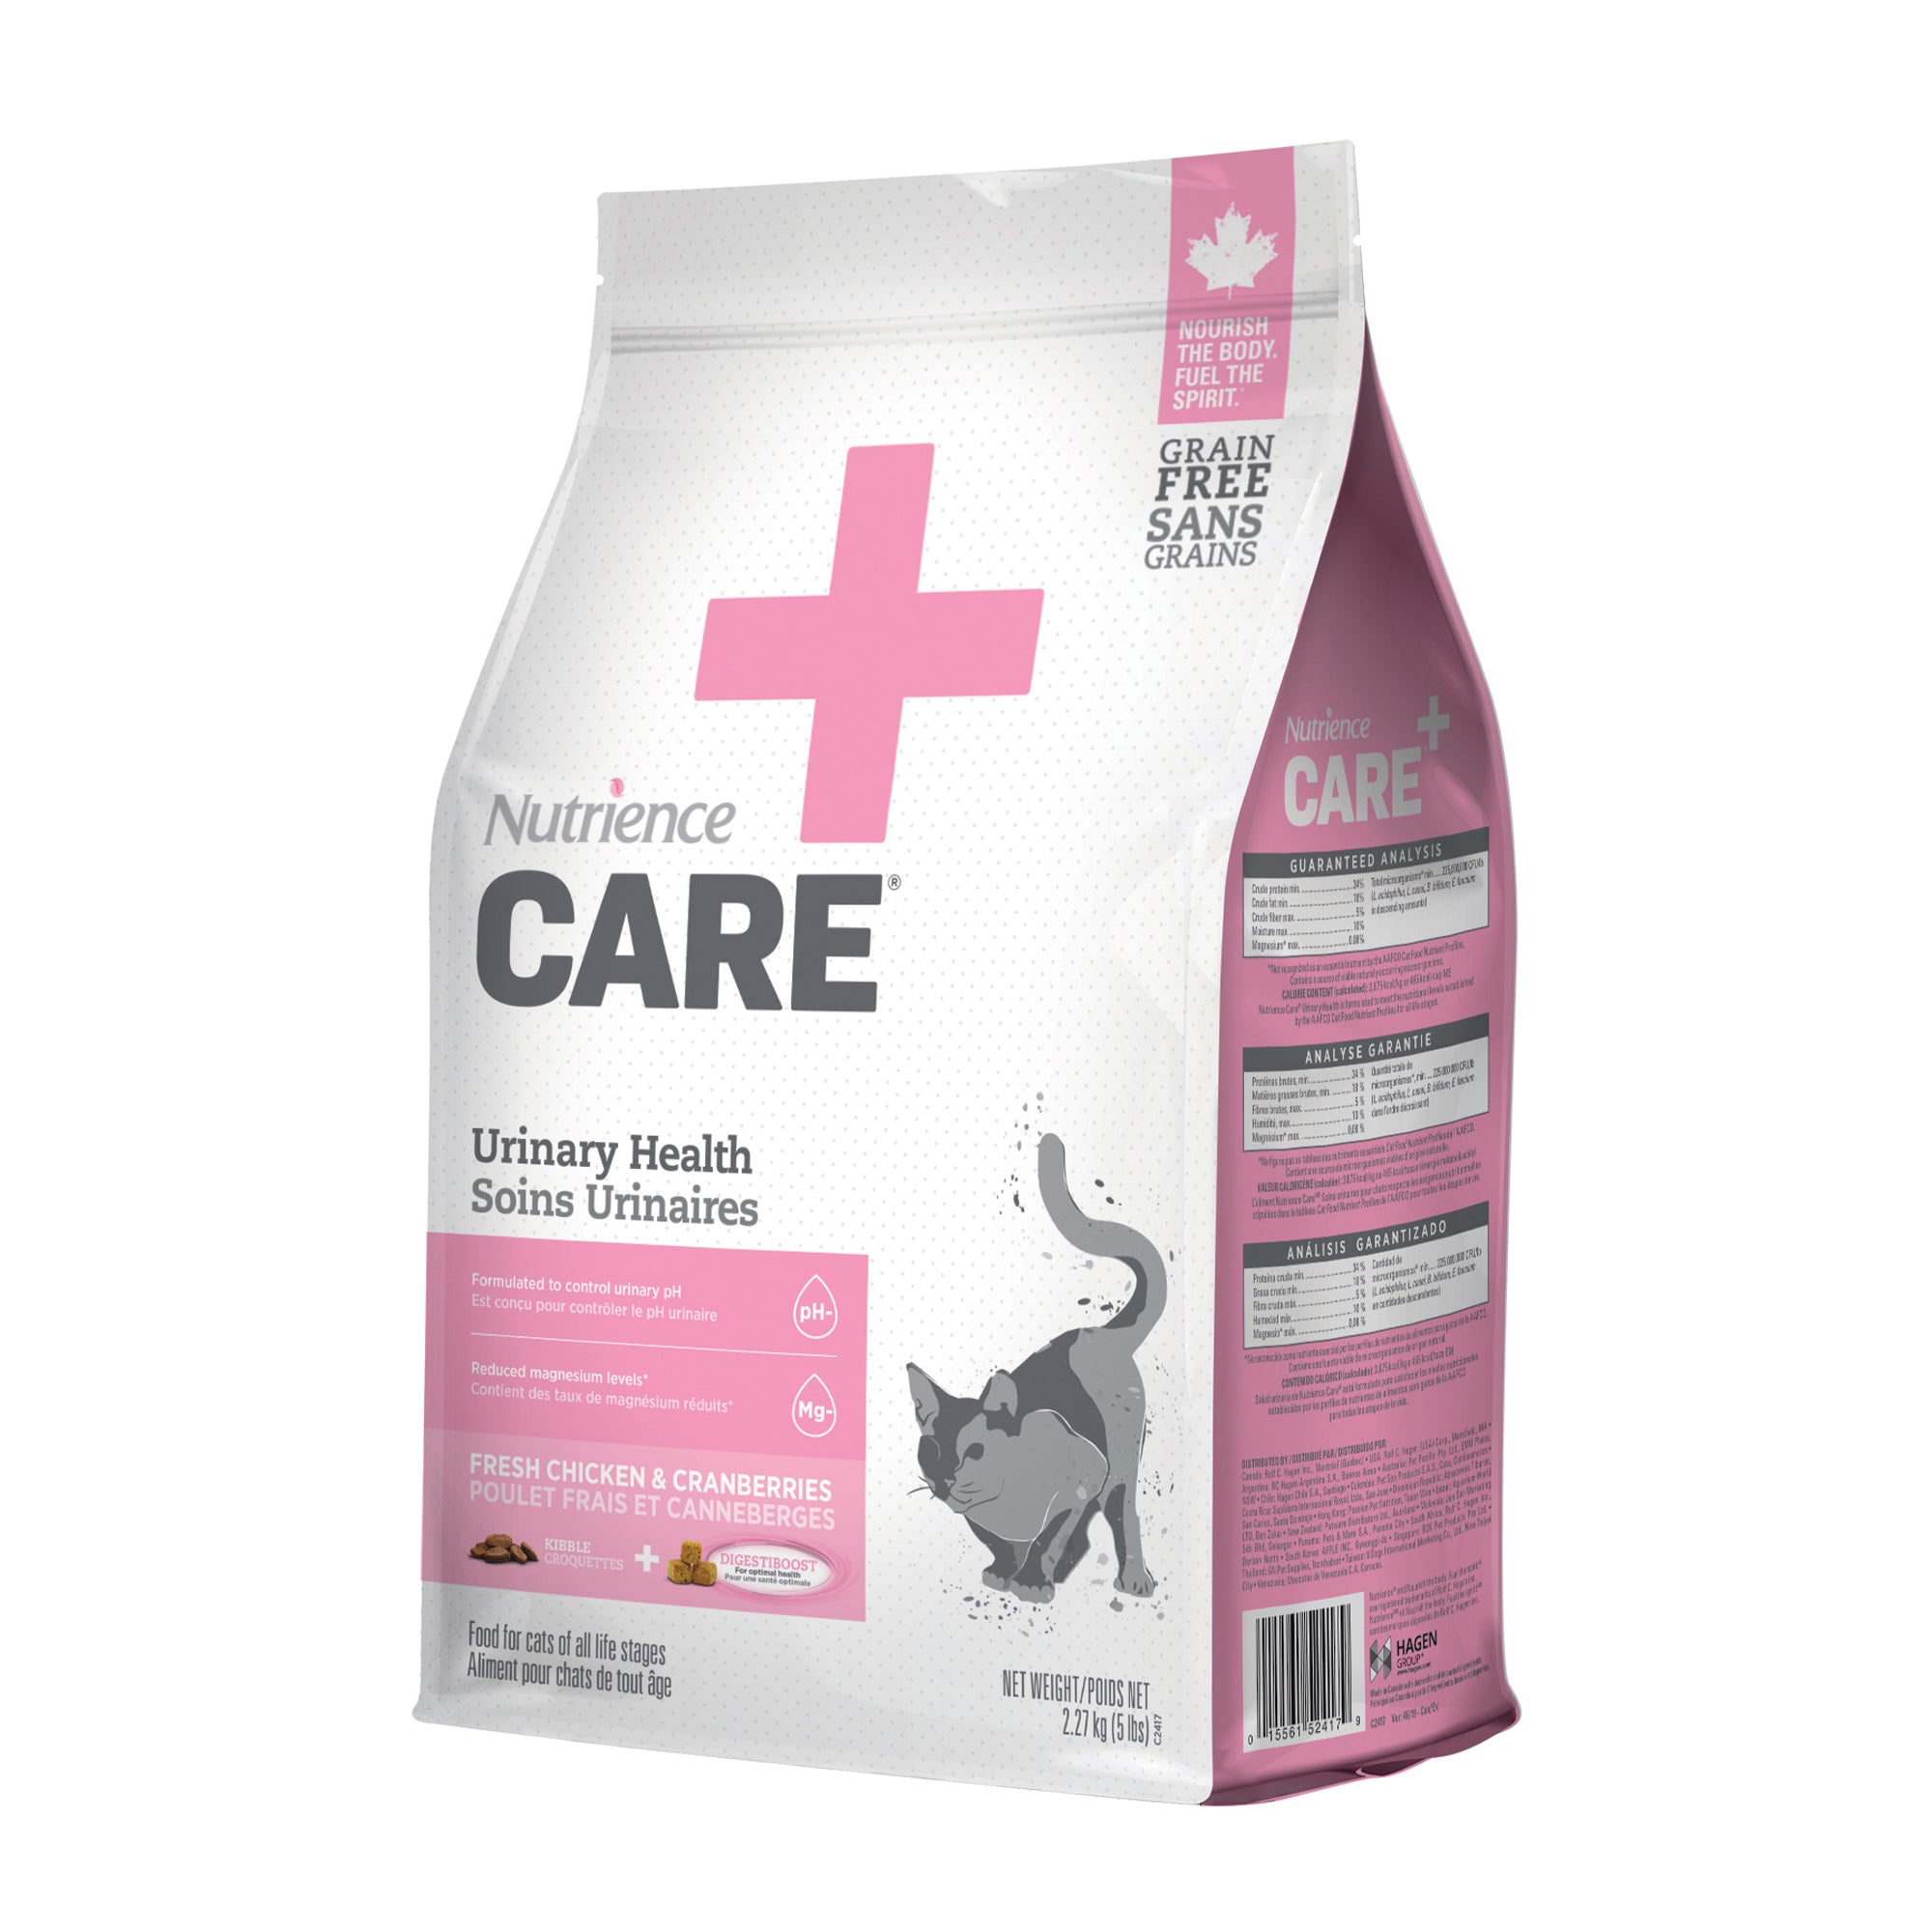 Nutrience Care Urinary Health for Cats